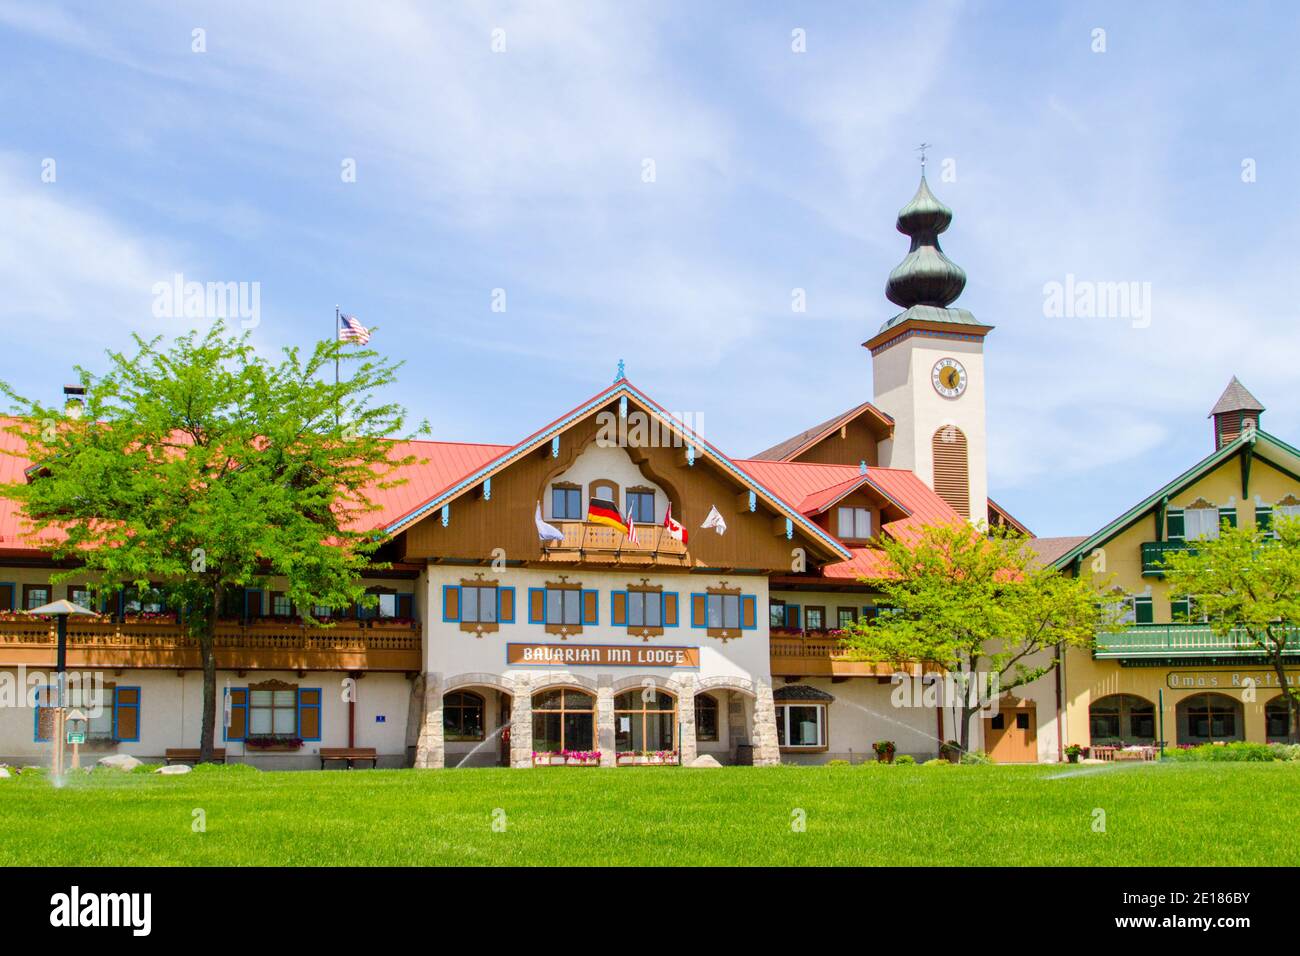 Frankenmuth, Michigan, USA - June 3, 2020: Exterior of the Bavarian Inn Lodge in the popular German themed resort town of Frankenmuth. Stock Photo